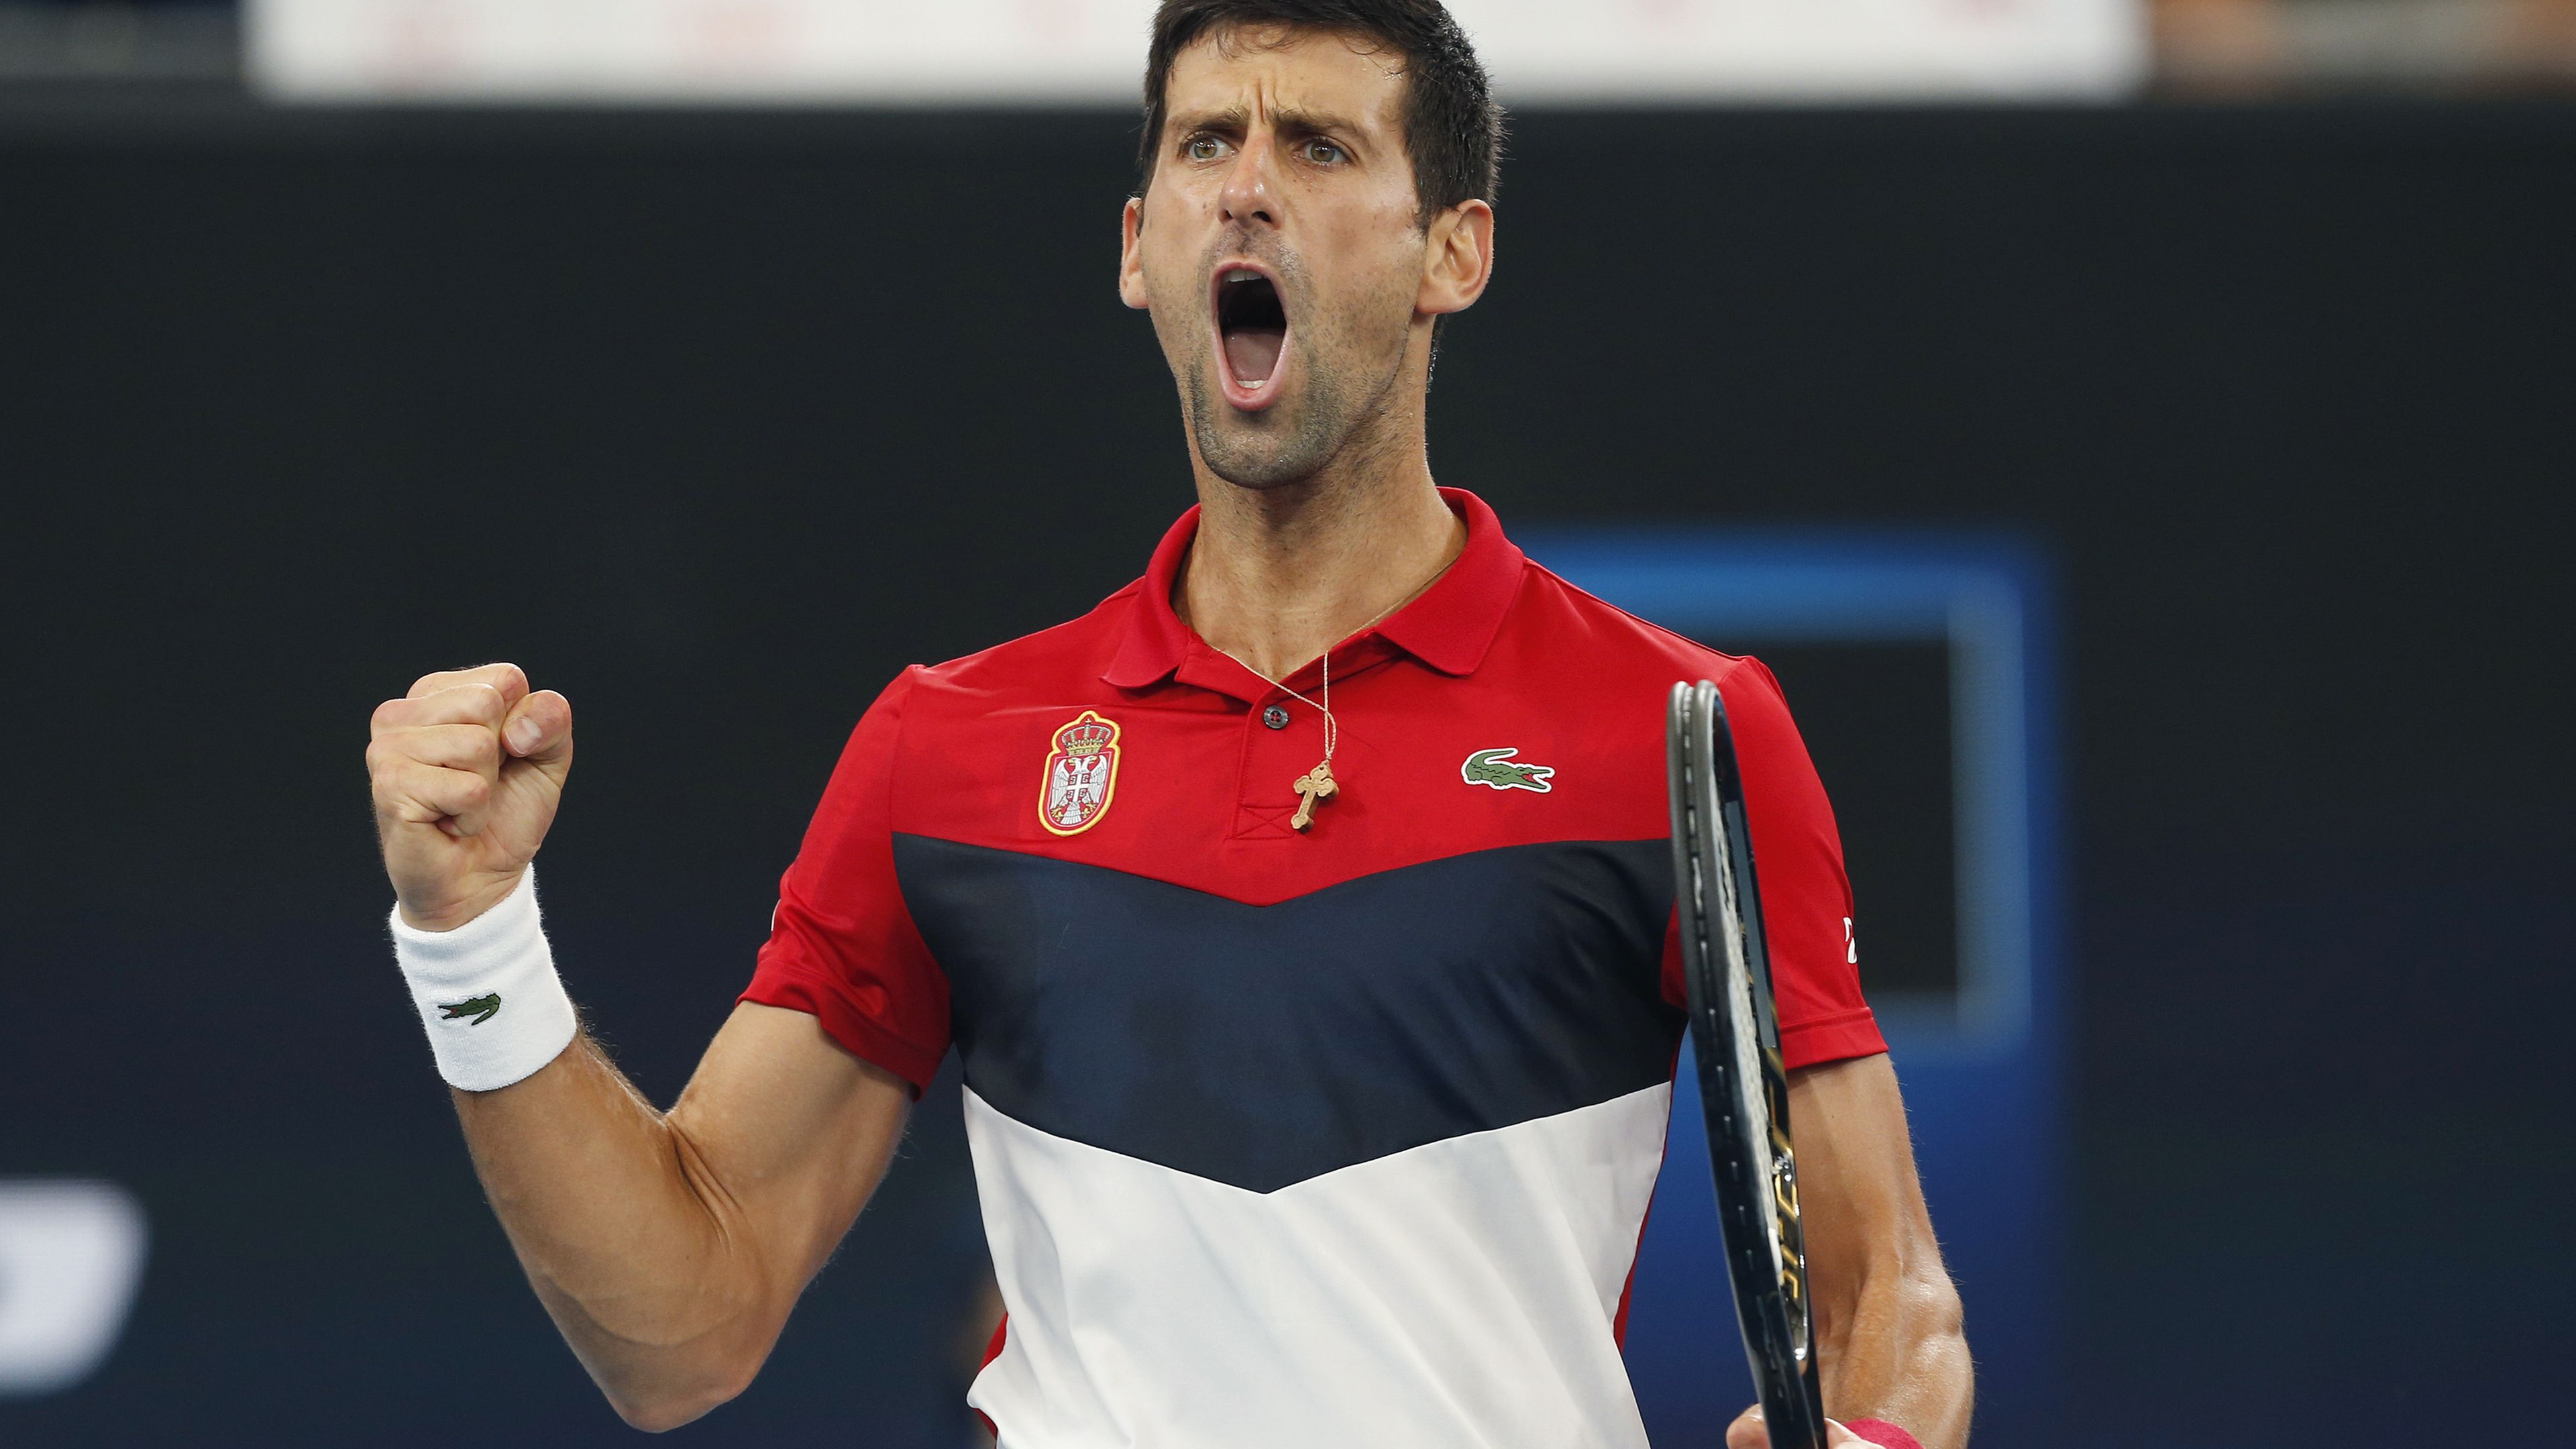 Novak Djokovic says he was 'selfish' to do interview after testing positive to COVID-19